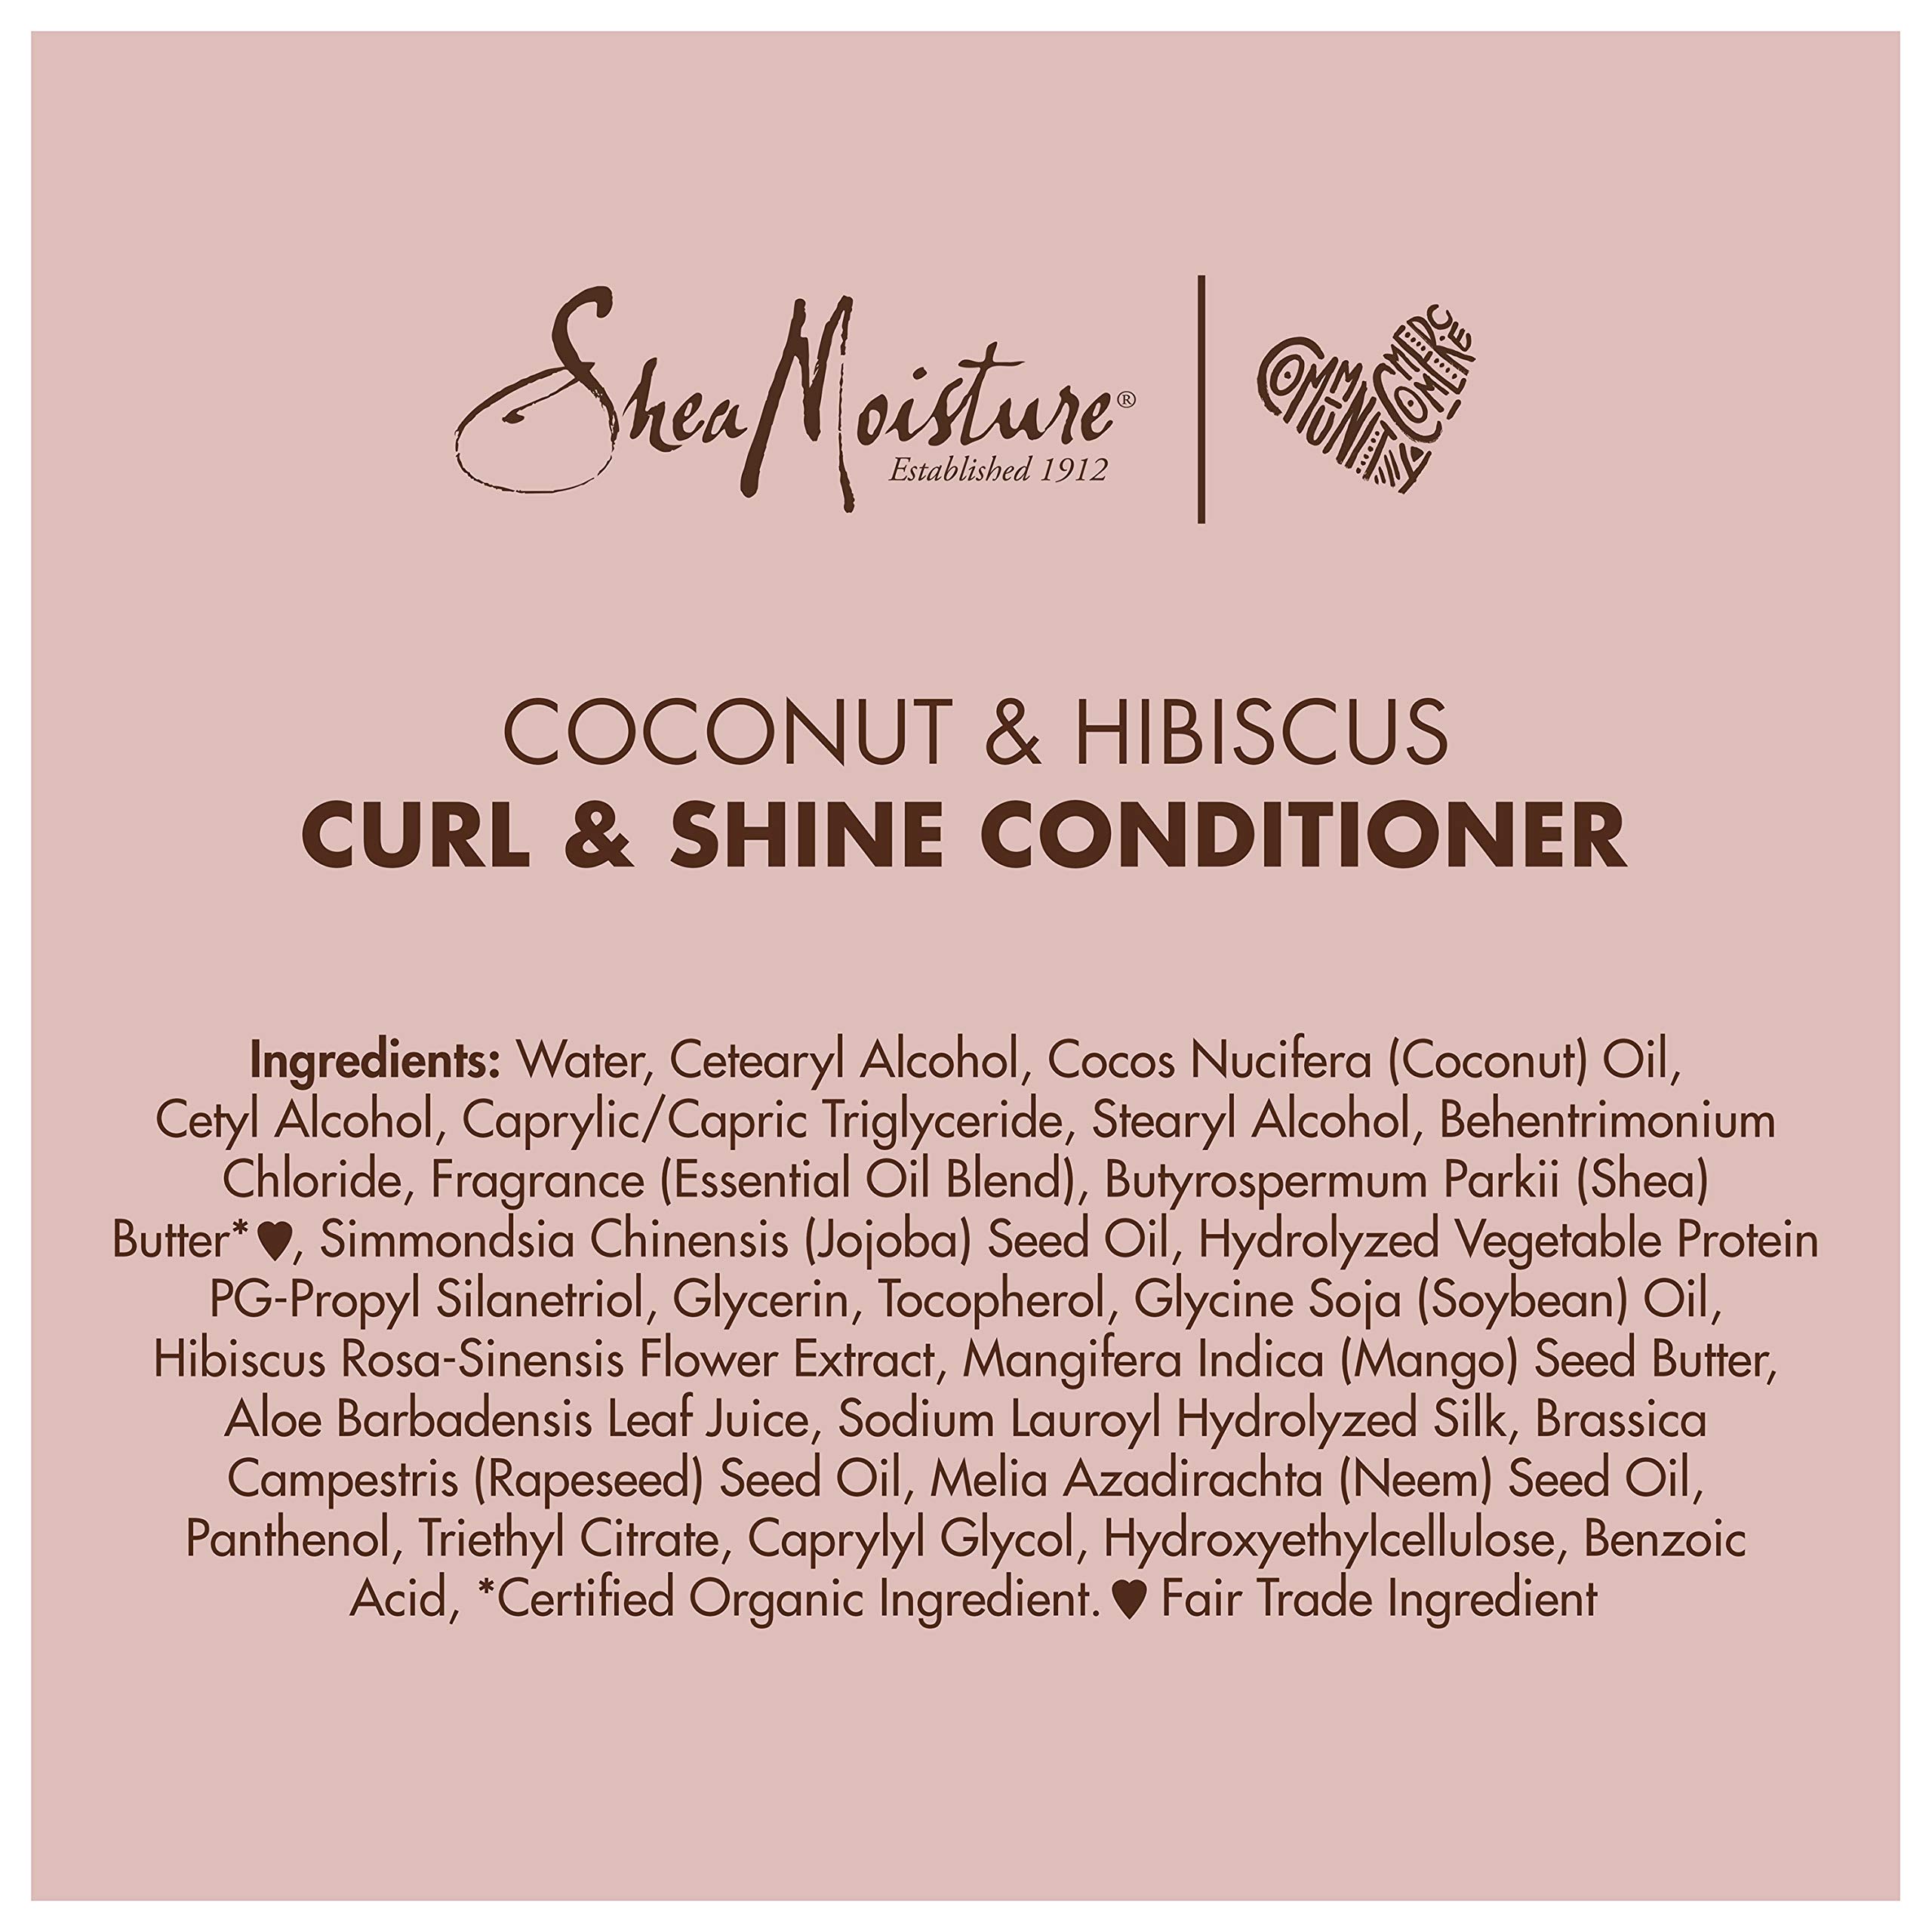 SheaMoisture Conditioner Curl and Shine Silicone Free for Curly Hair Coconut Hibiscus Moisturize & Define 13oz.